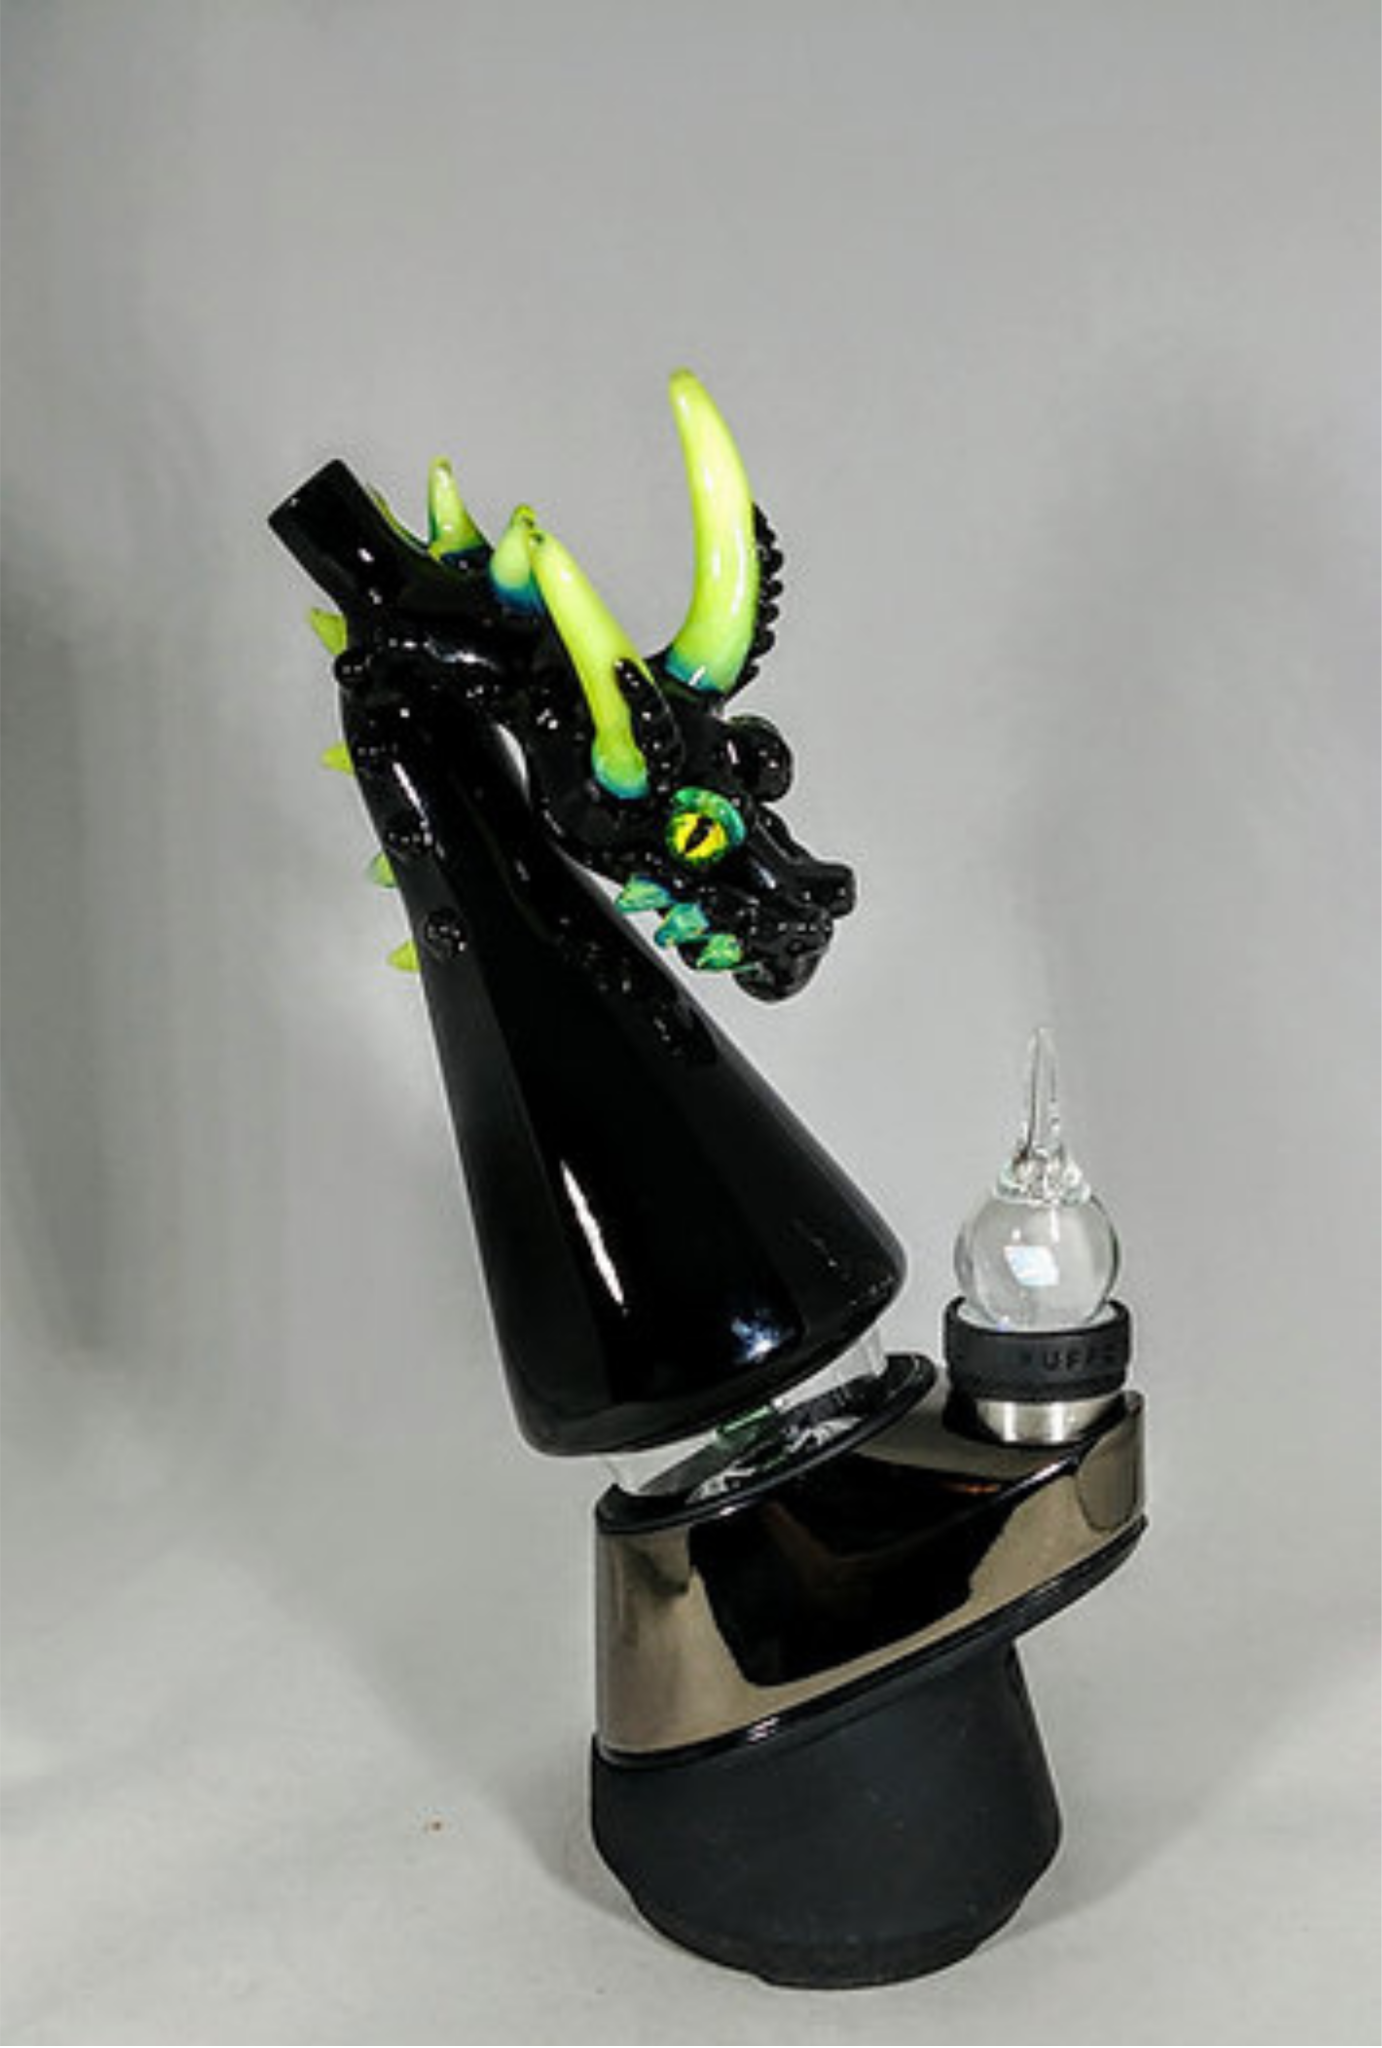 files/Black_Dragon_Puffco_Attachment_with_LED_-_GiggleGlass-1199151.png